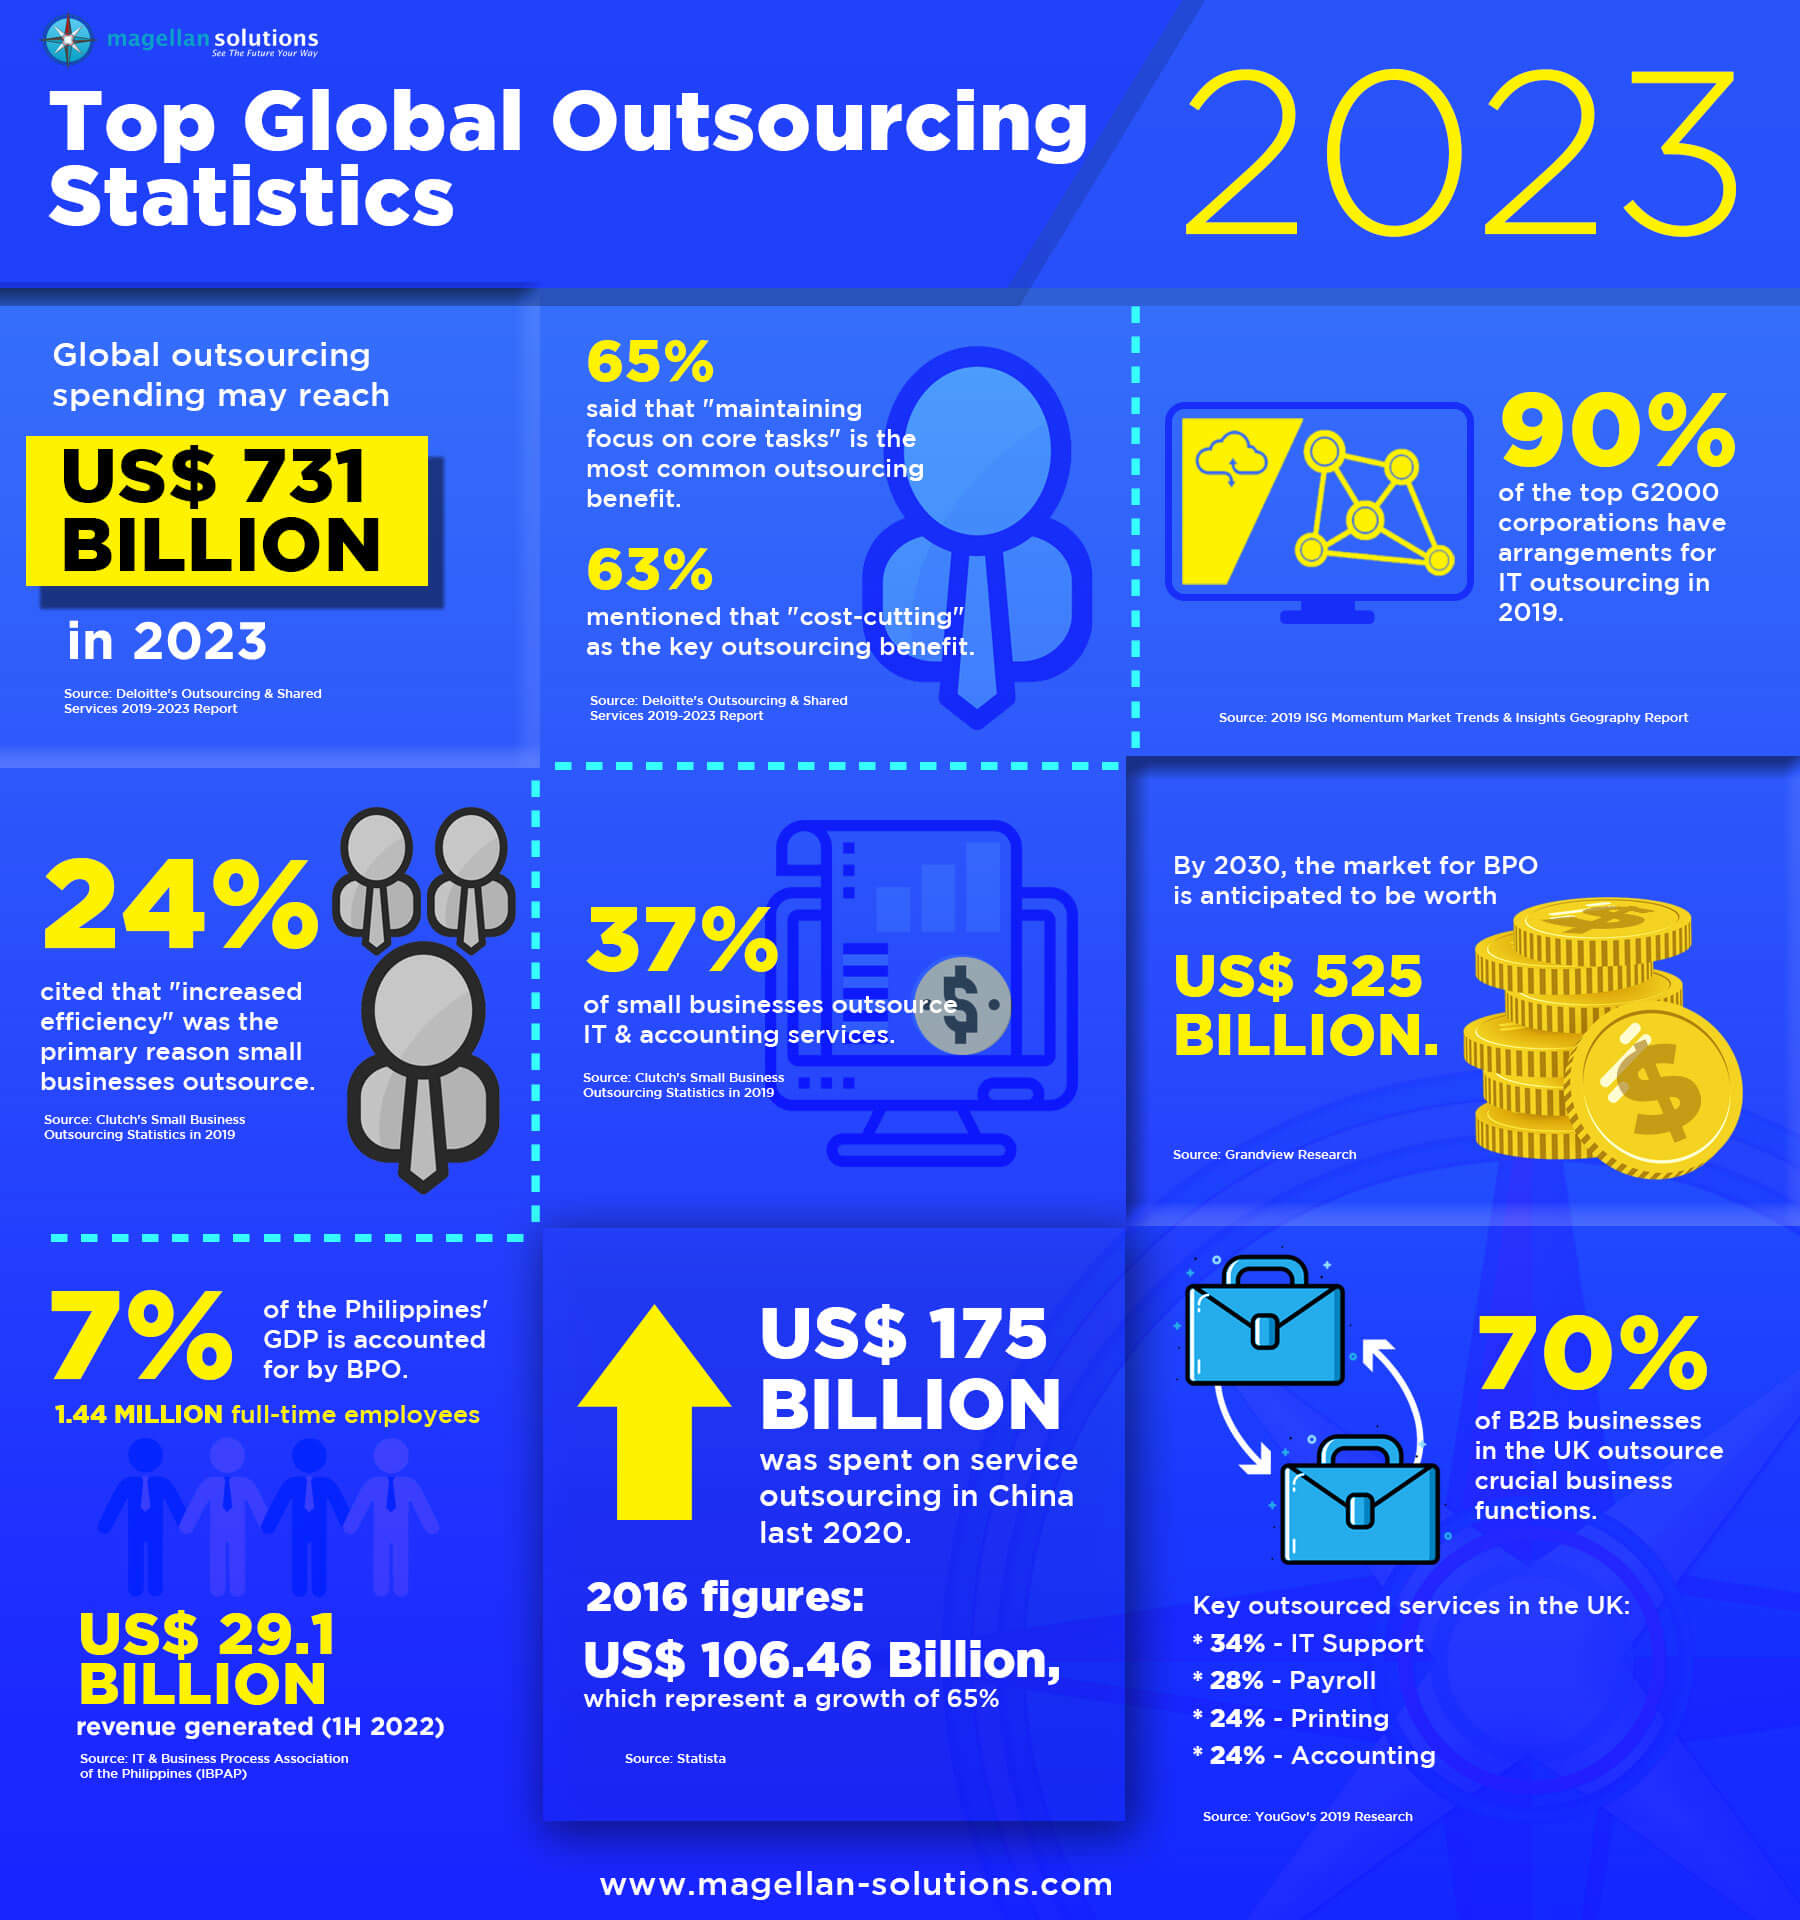 Top Global Outsourcing Statistics